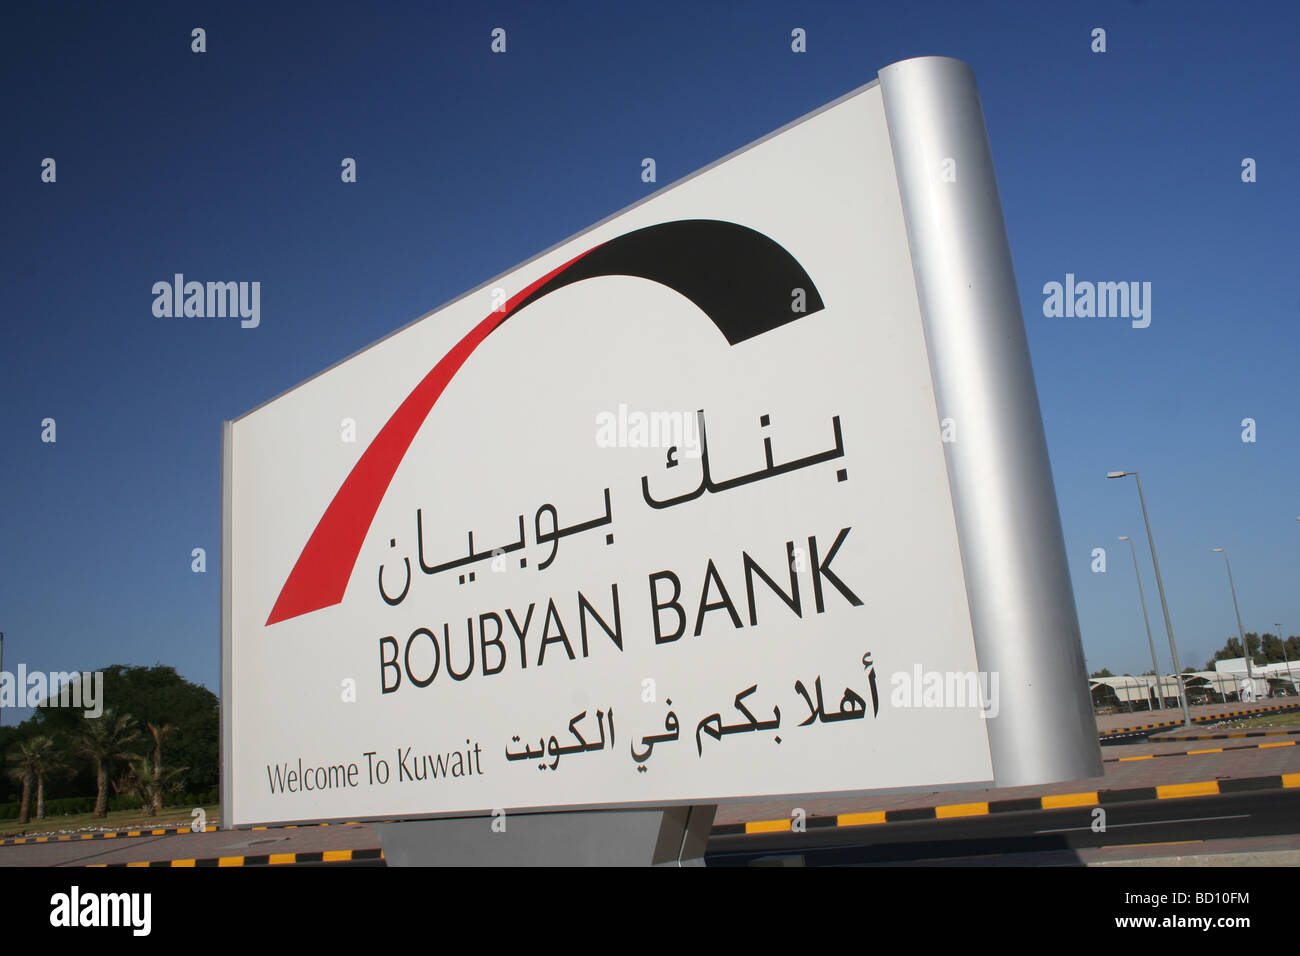 Boubyan Bank High Resolution Stock Photography and Images - Alamy